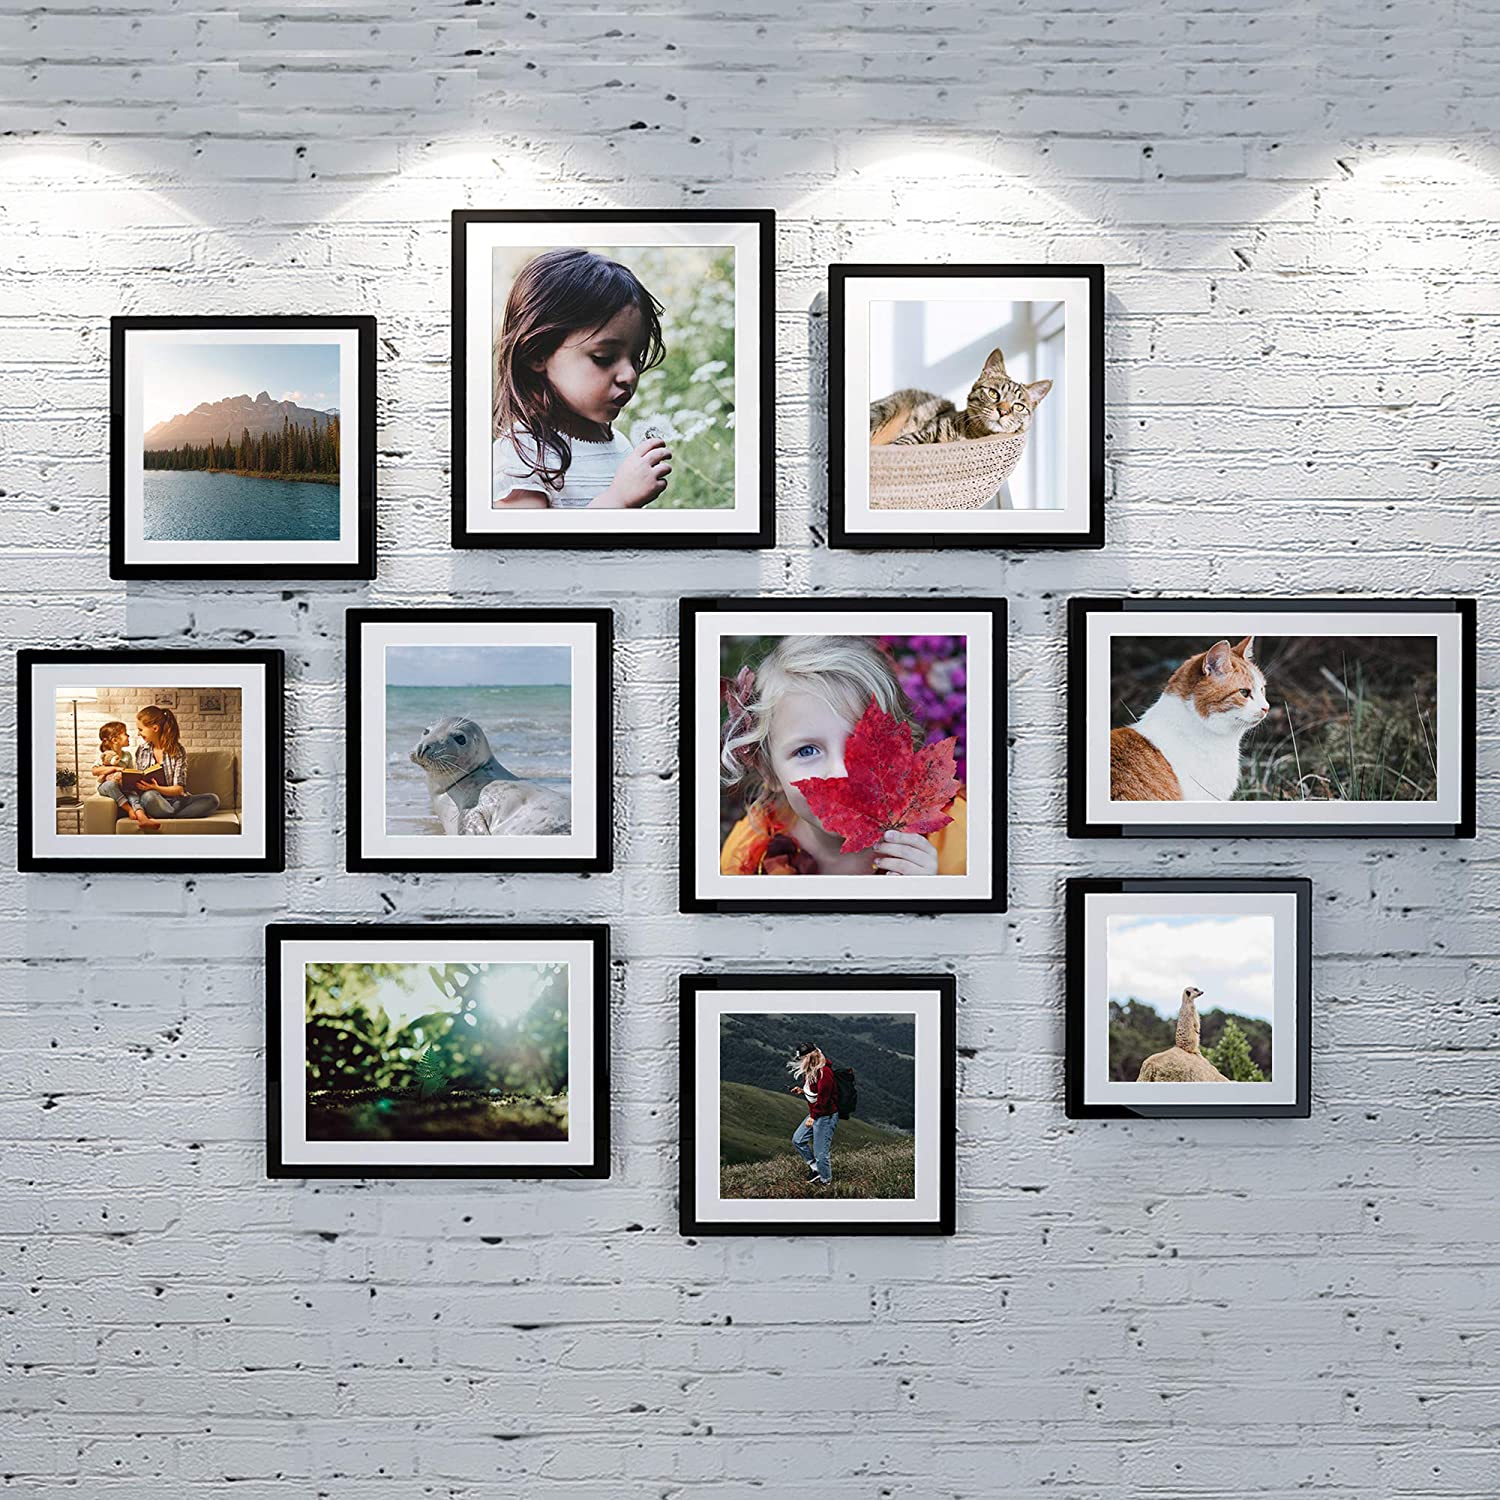 8 x 8 Square Photo Frames - 8x8 Picture Frames